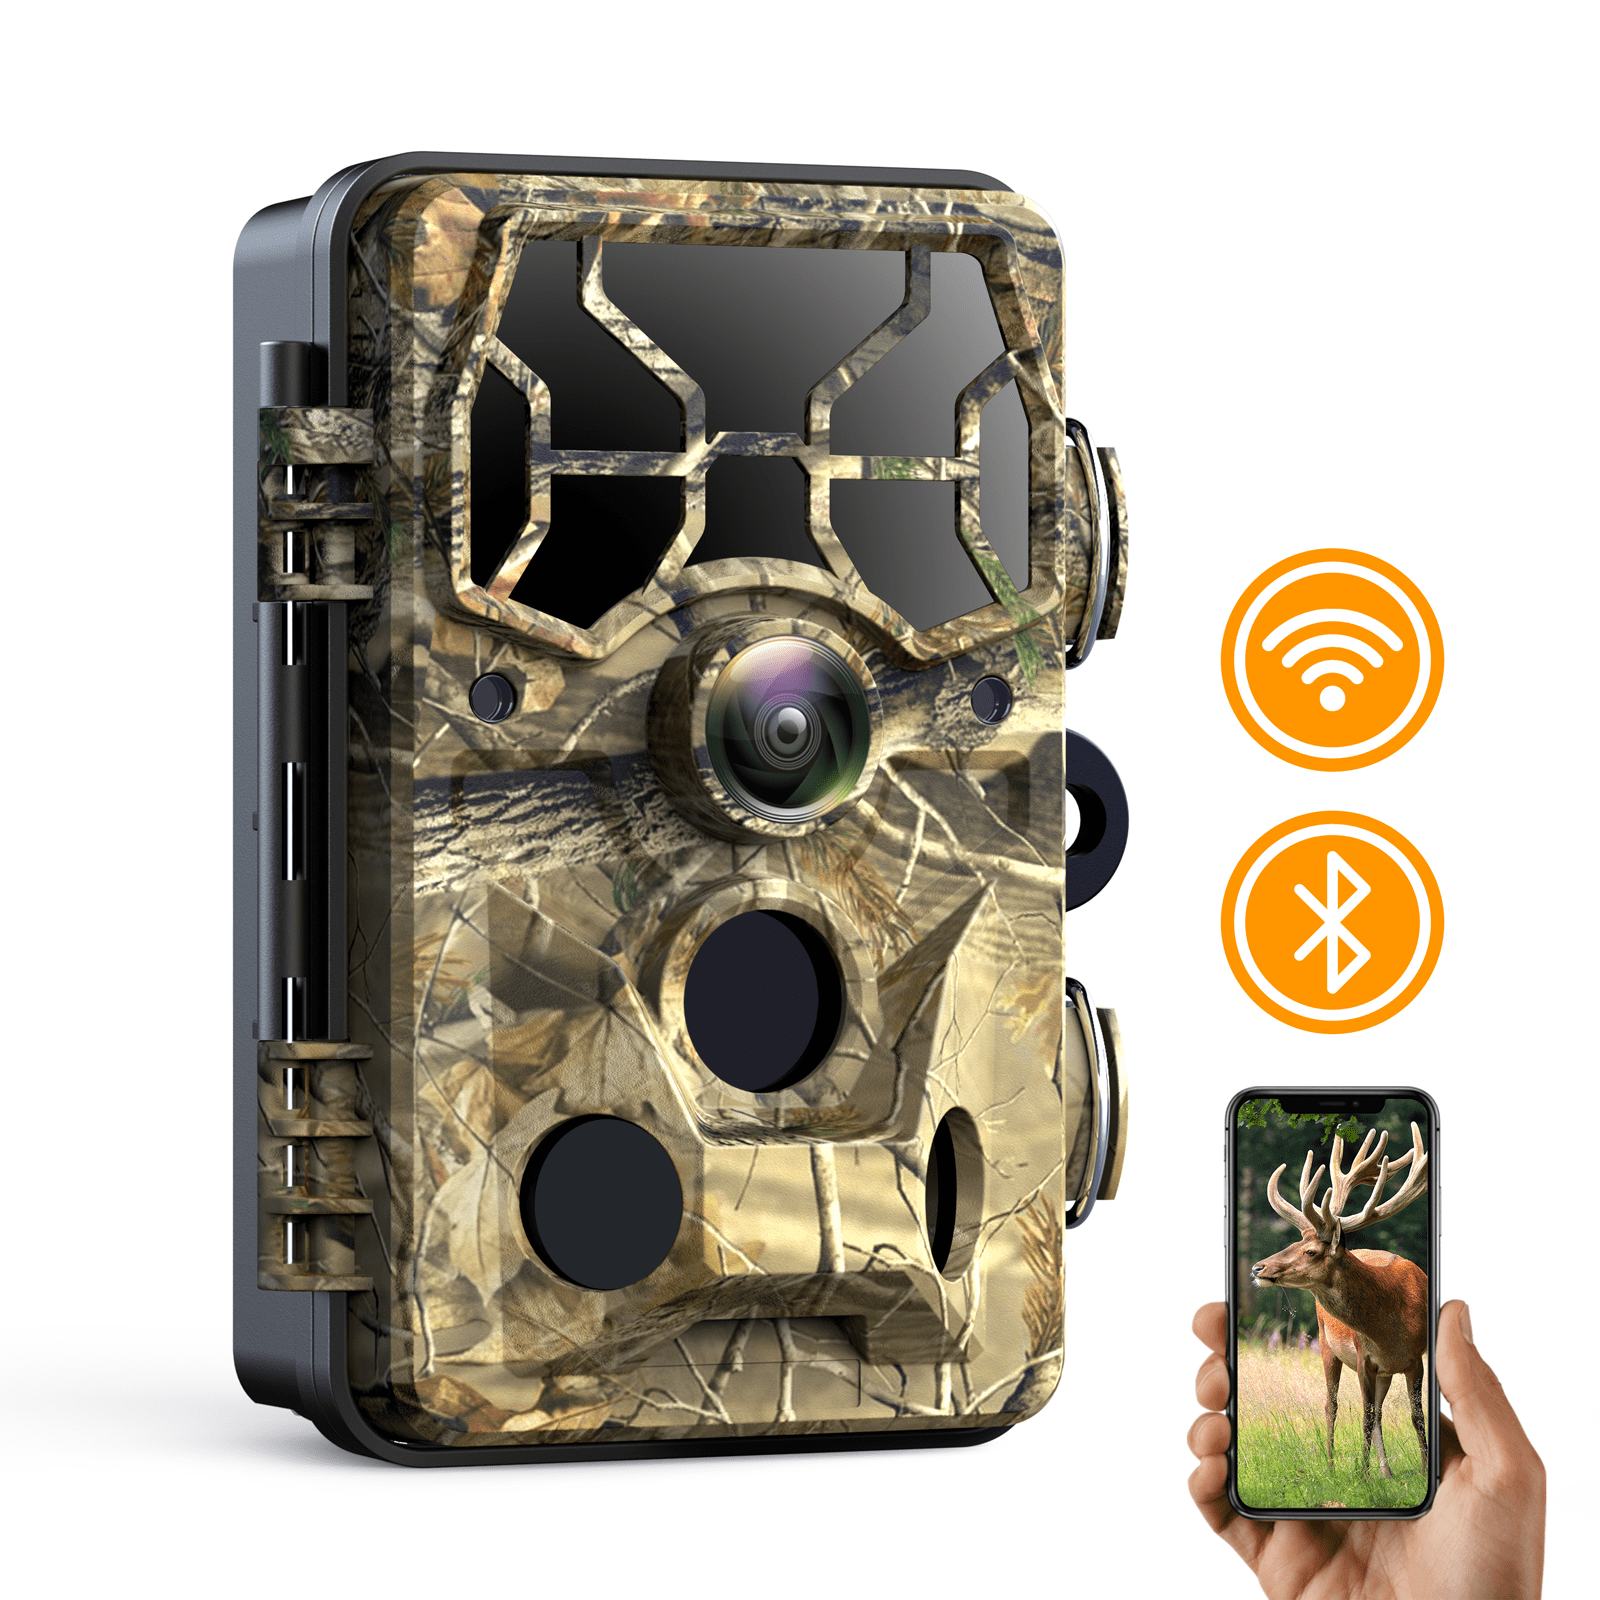 Campark t80 Waterproof WiFi trail camera with Night vision Bluetooth 1296P 20MP 